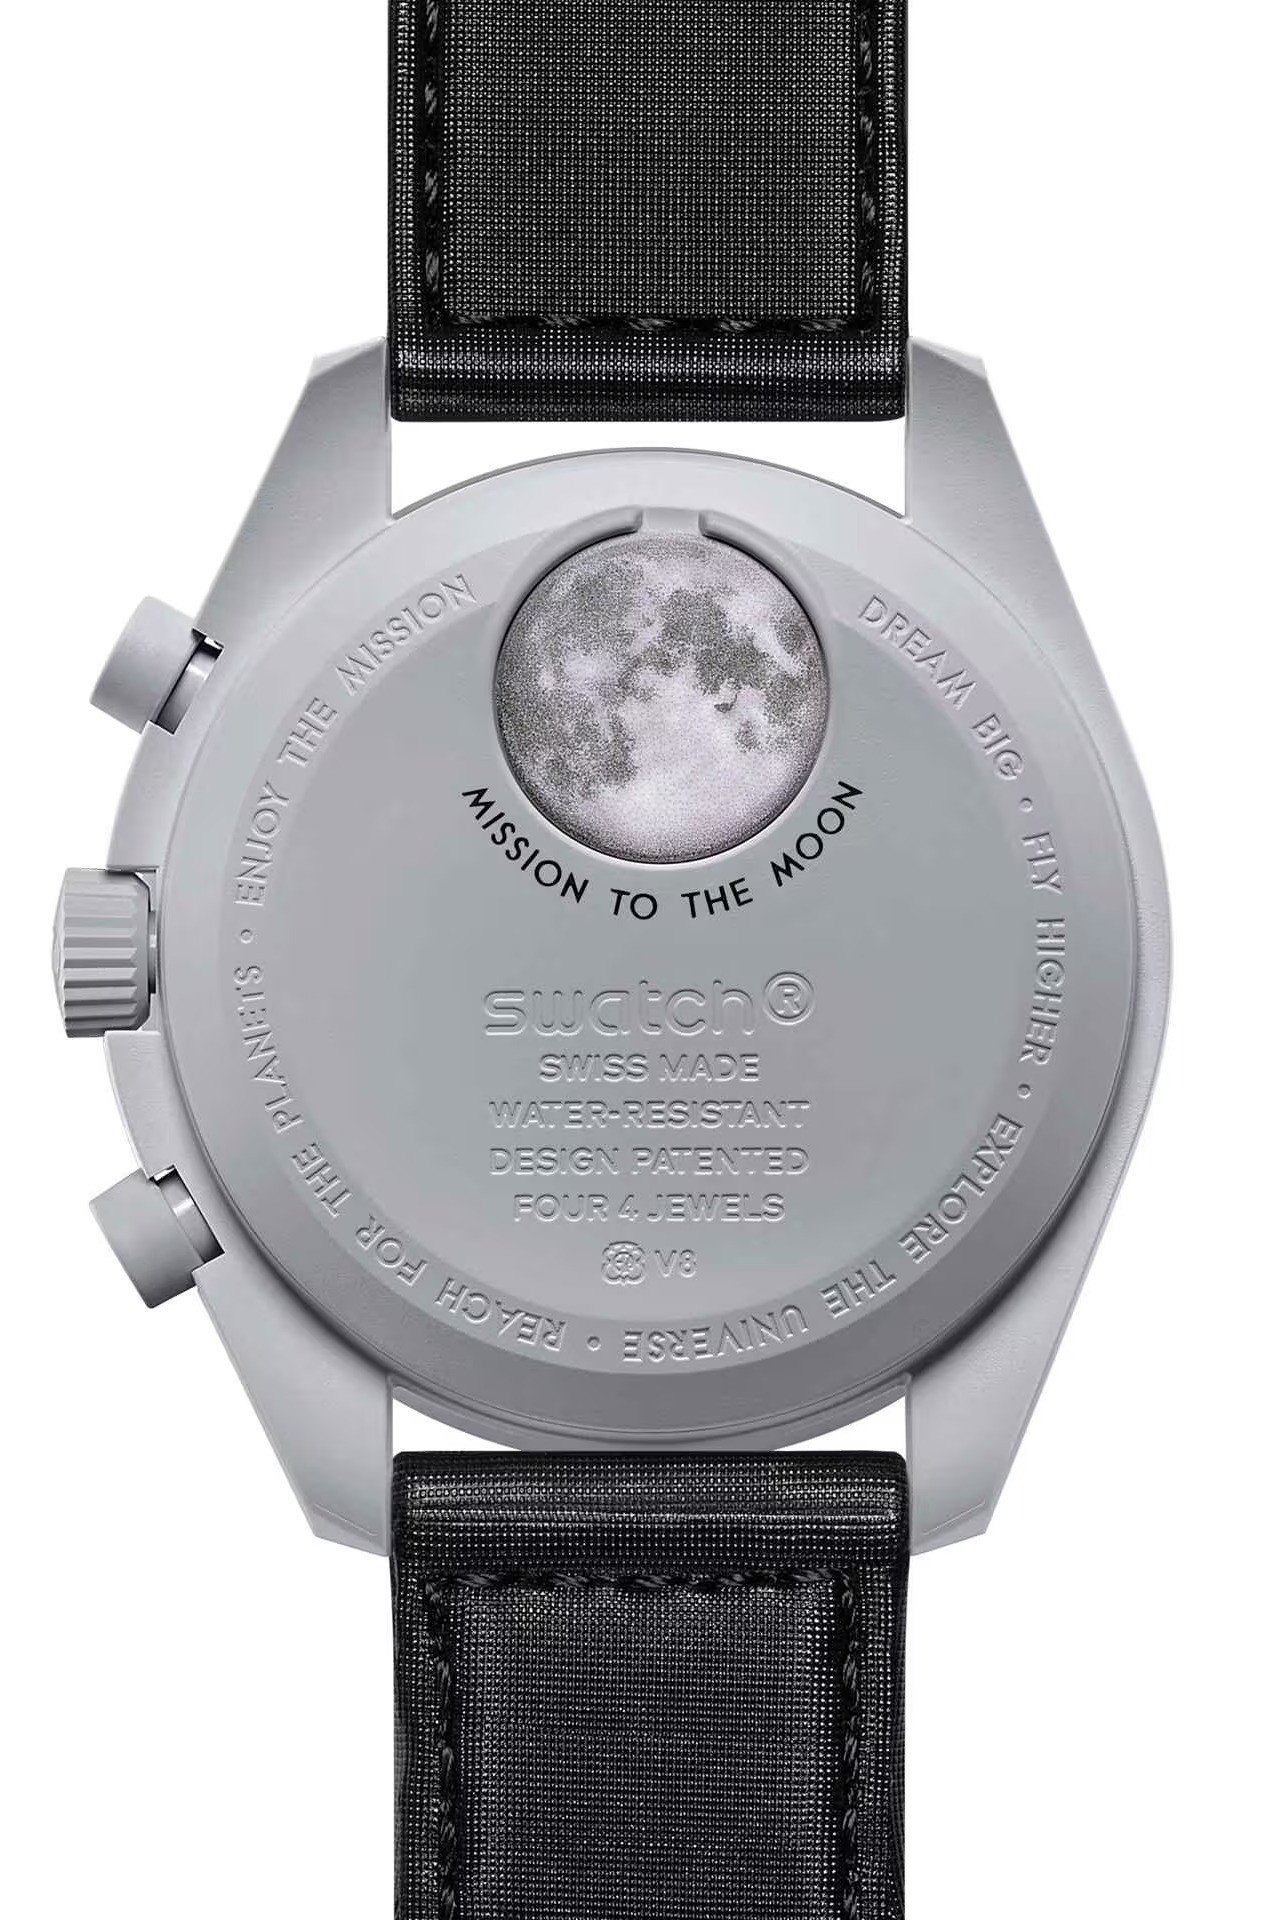 Moonswatch Mission to The Moon Bioceramic Watch - Black